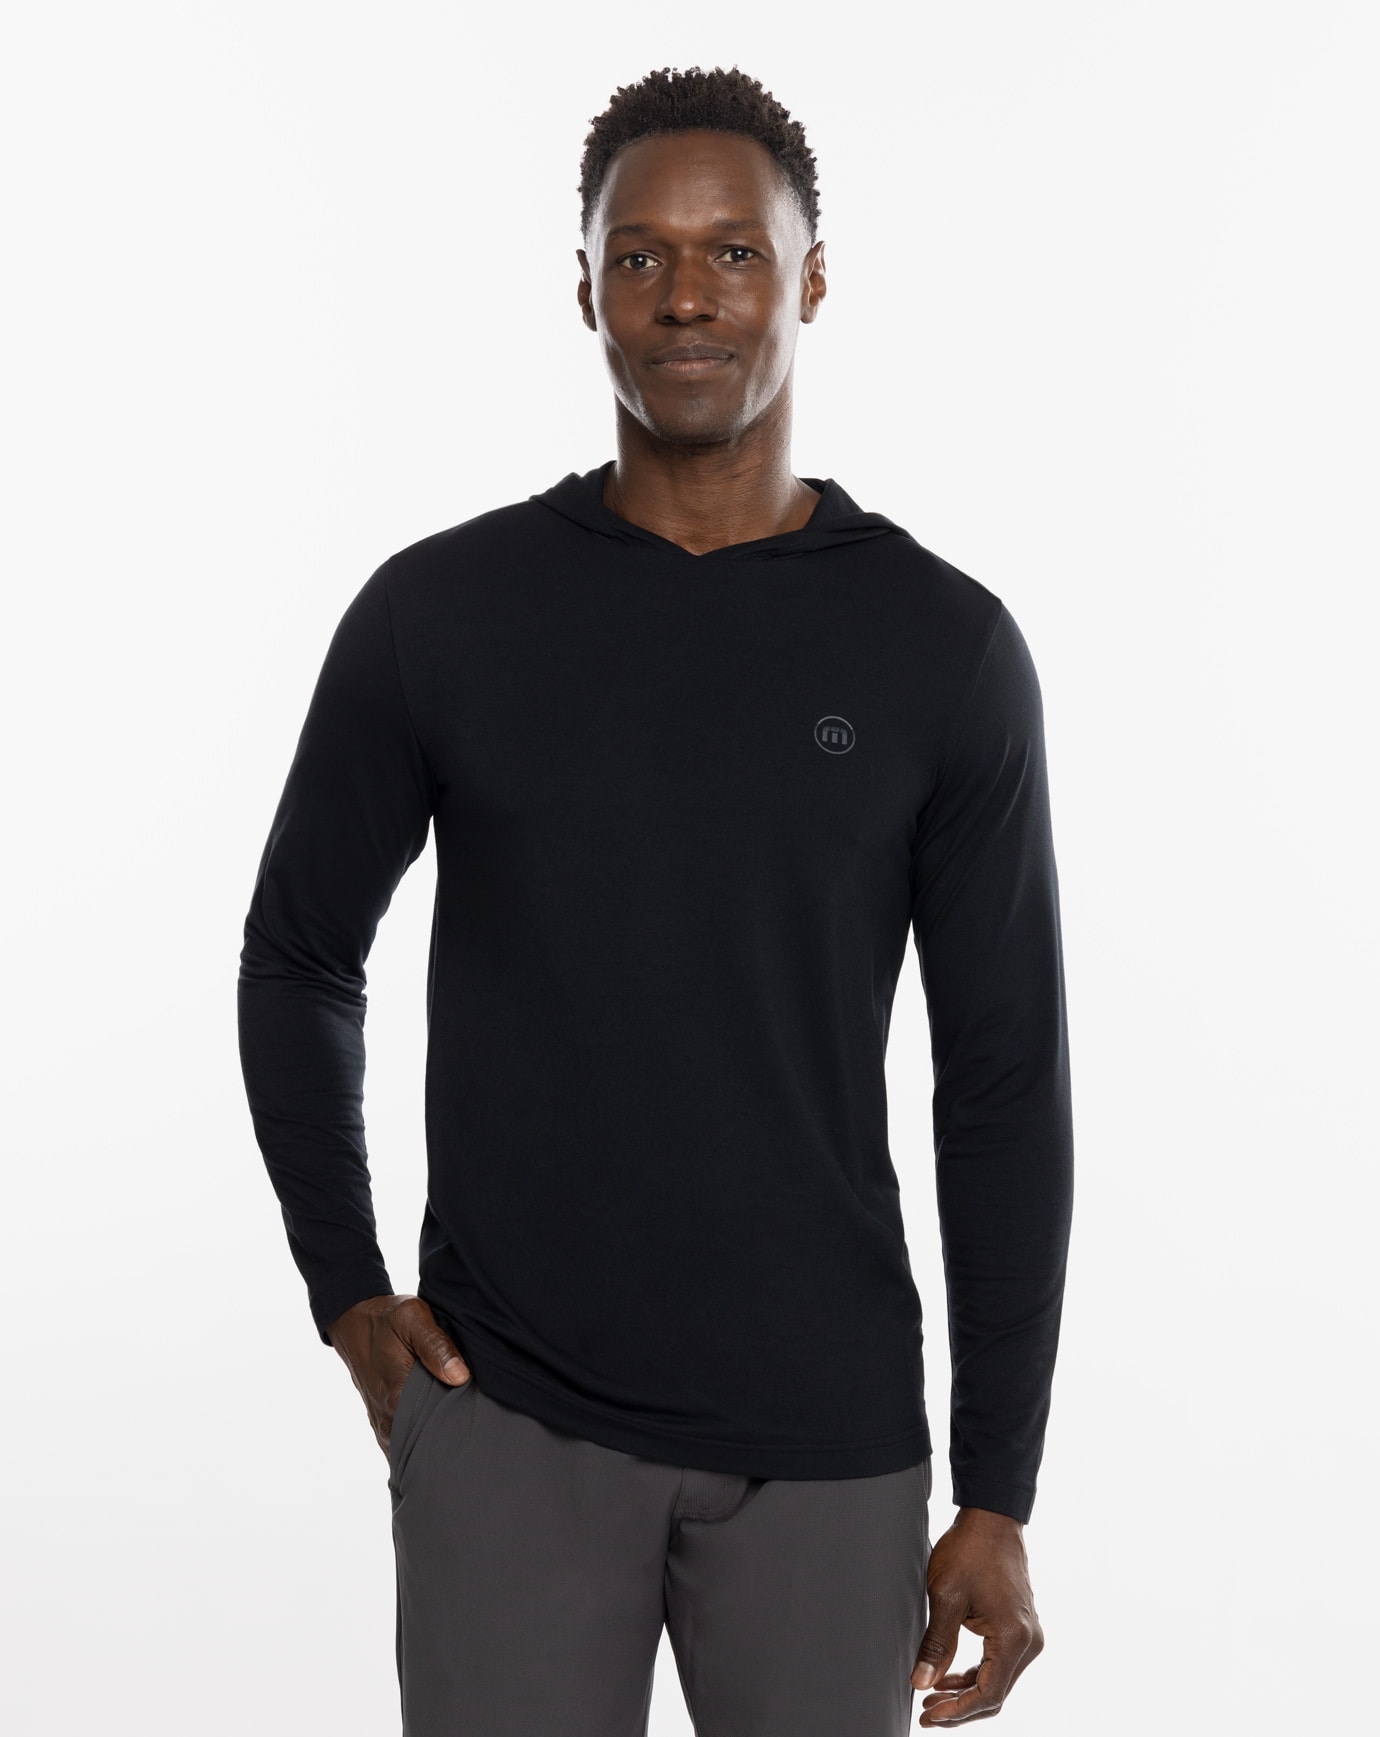 Related Product - SHIP SHAPE ACTIVE HOODIE